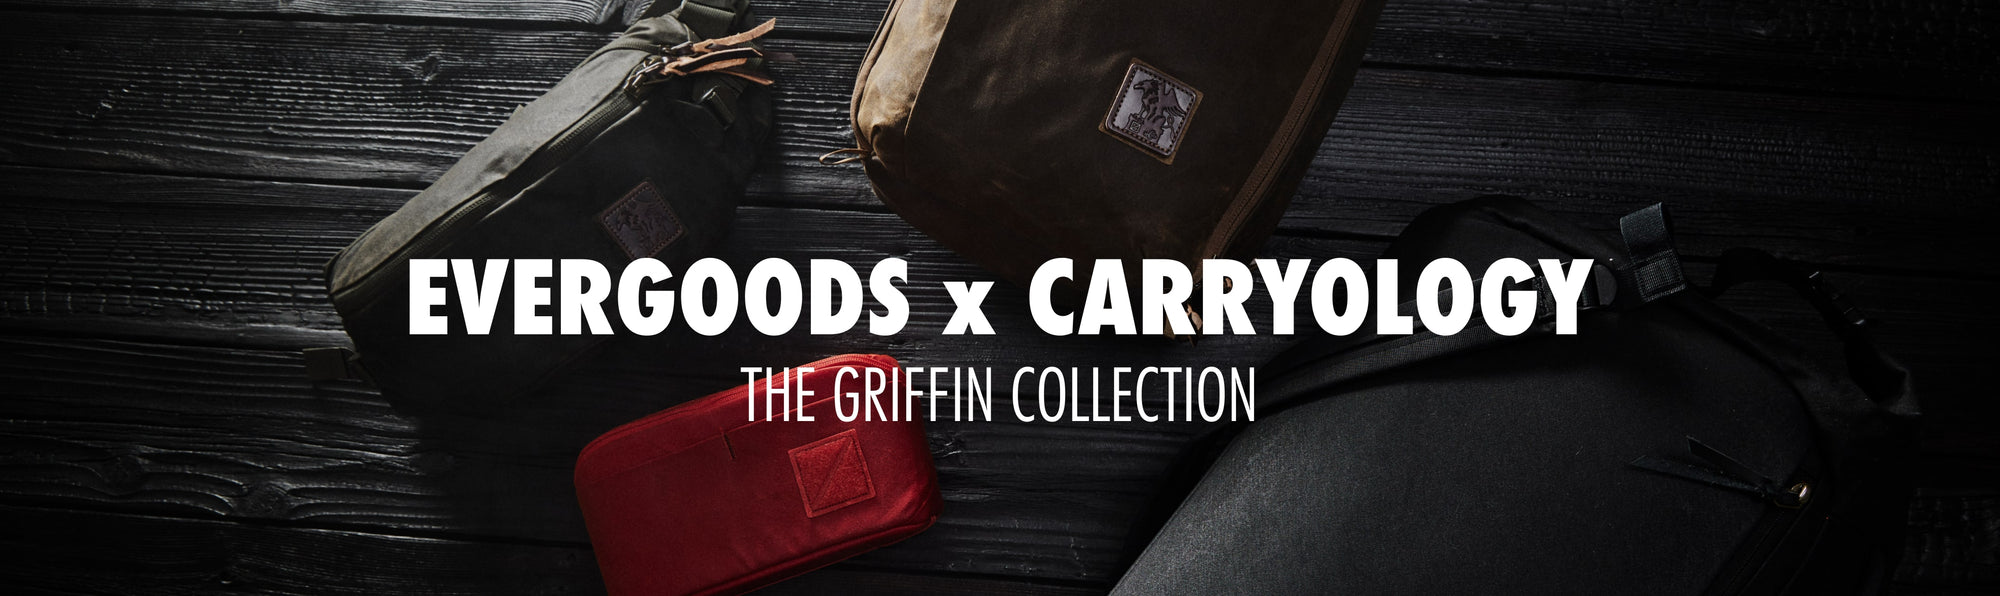 EVERGOODS X CARRYOLOGY GRIFFIN COLLECTION